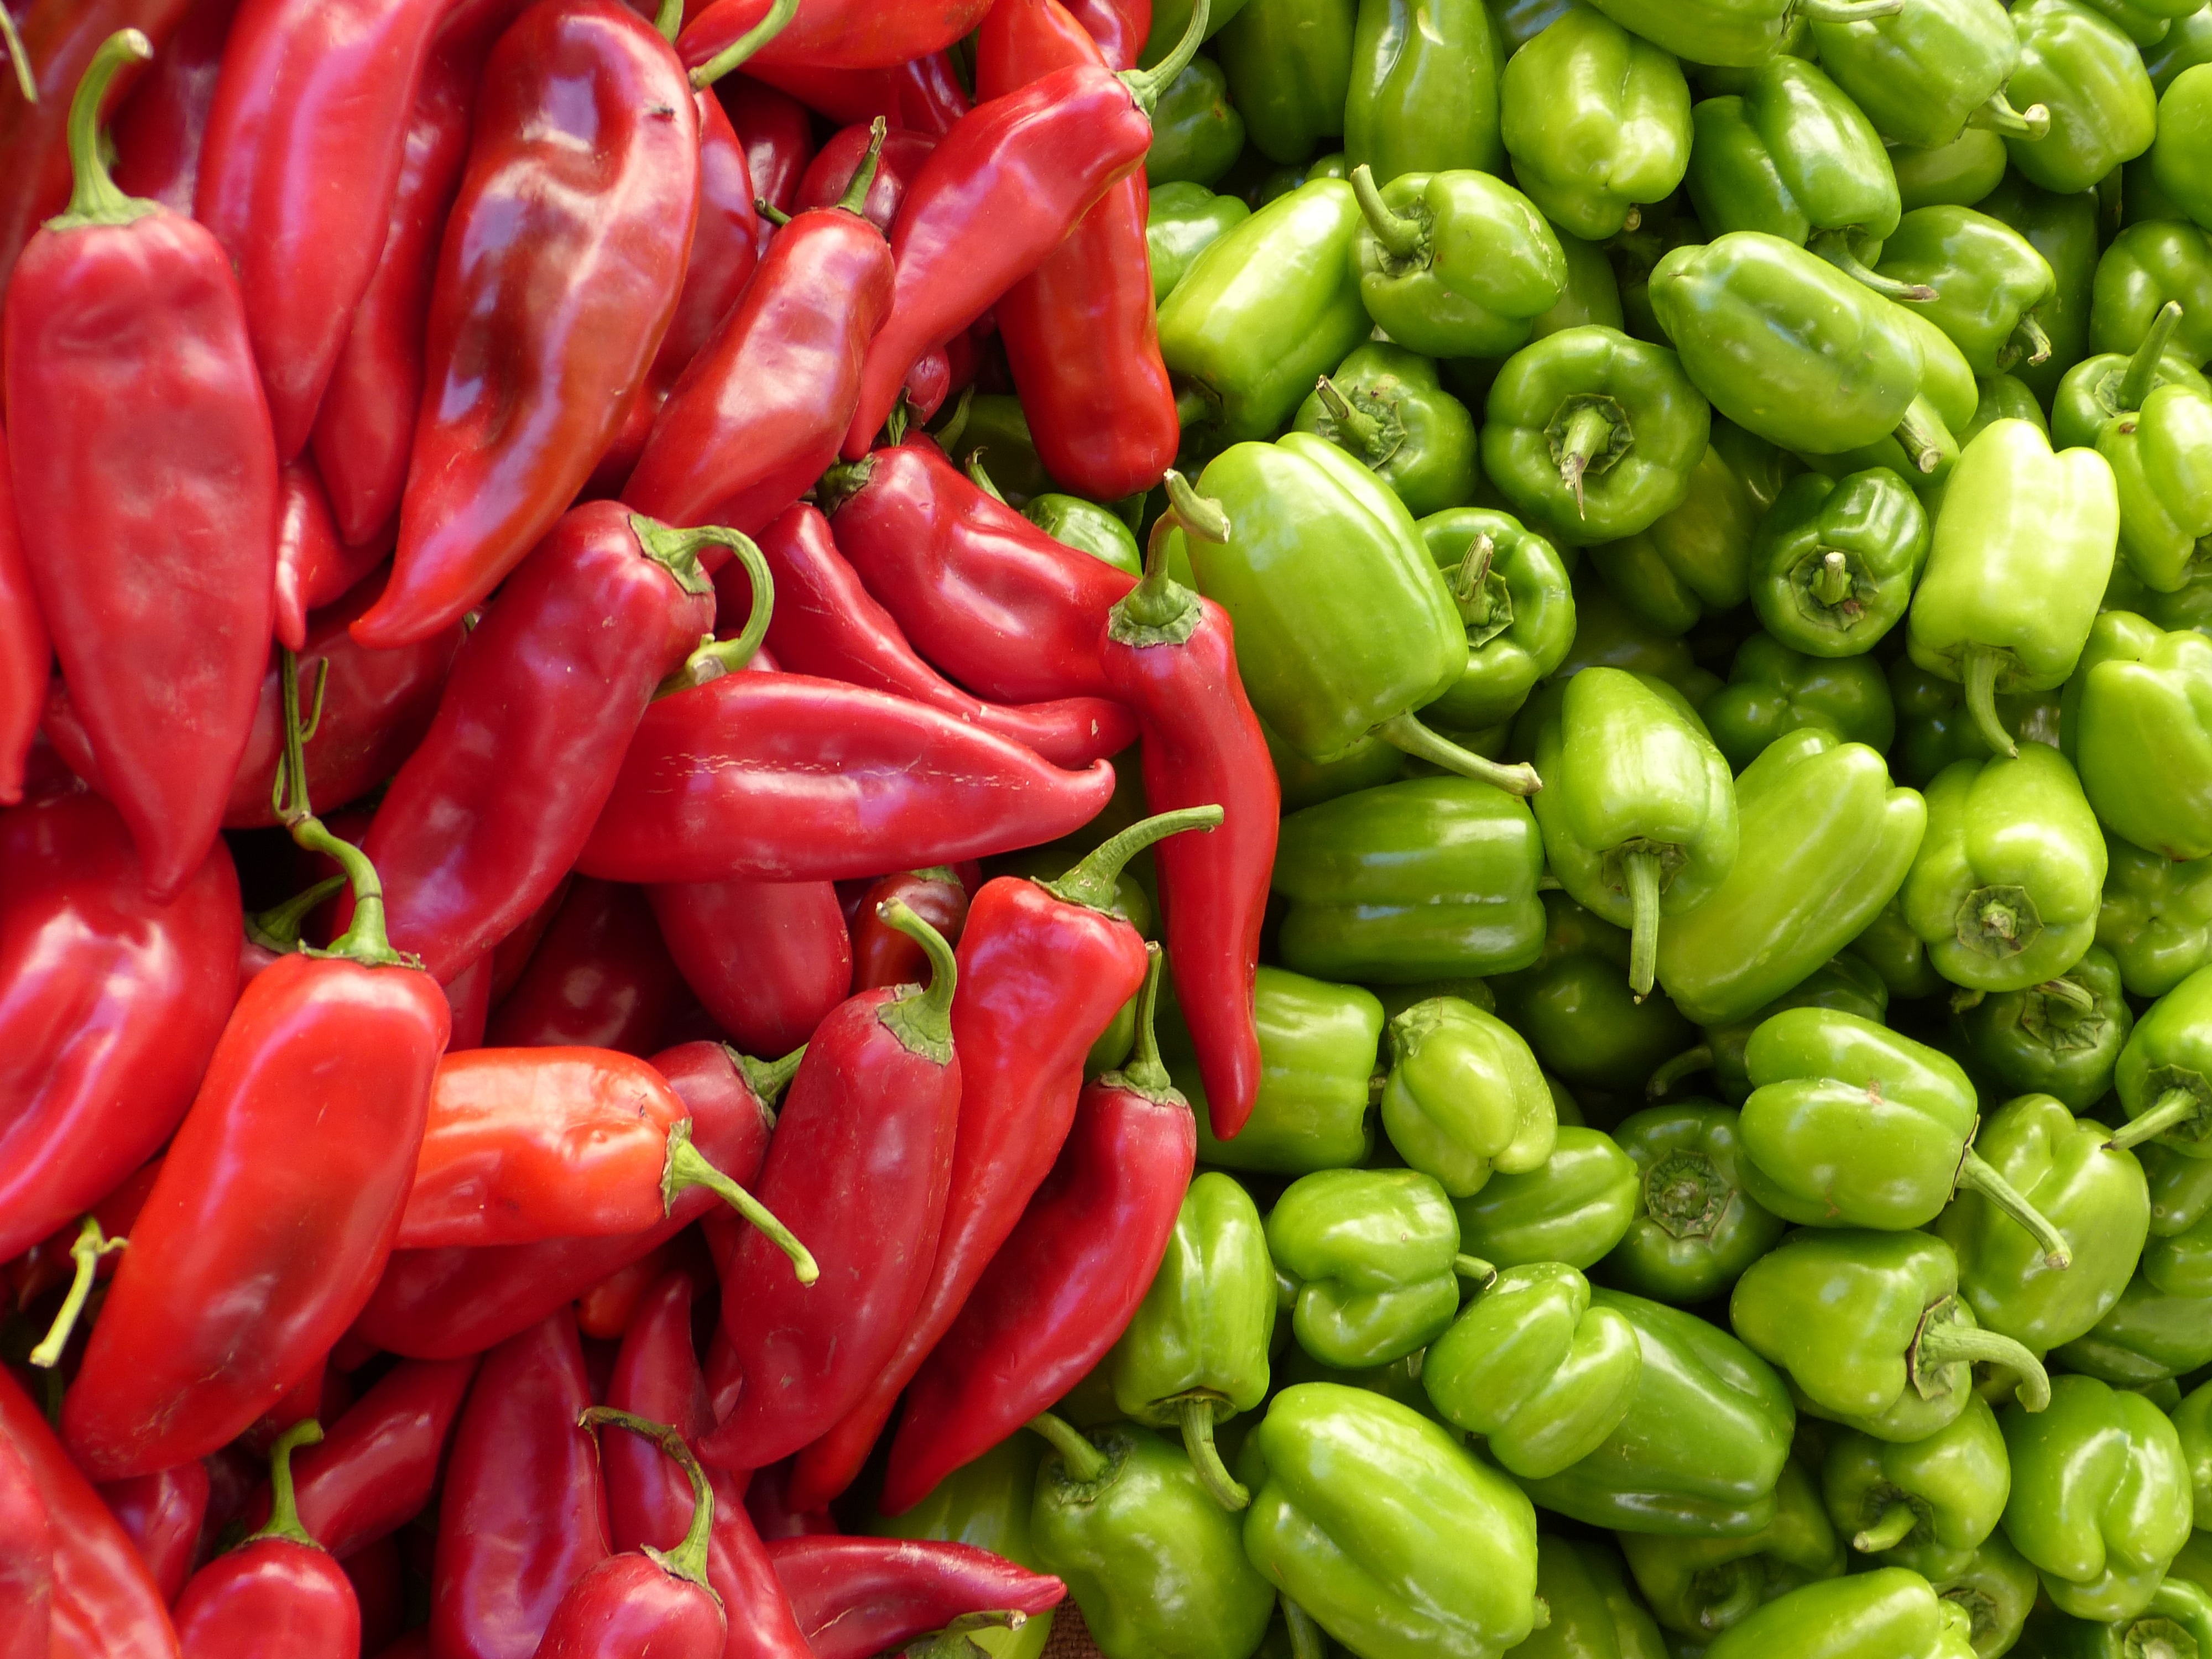 red jalapenos and green bell peppers